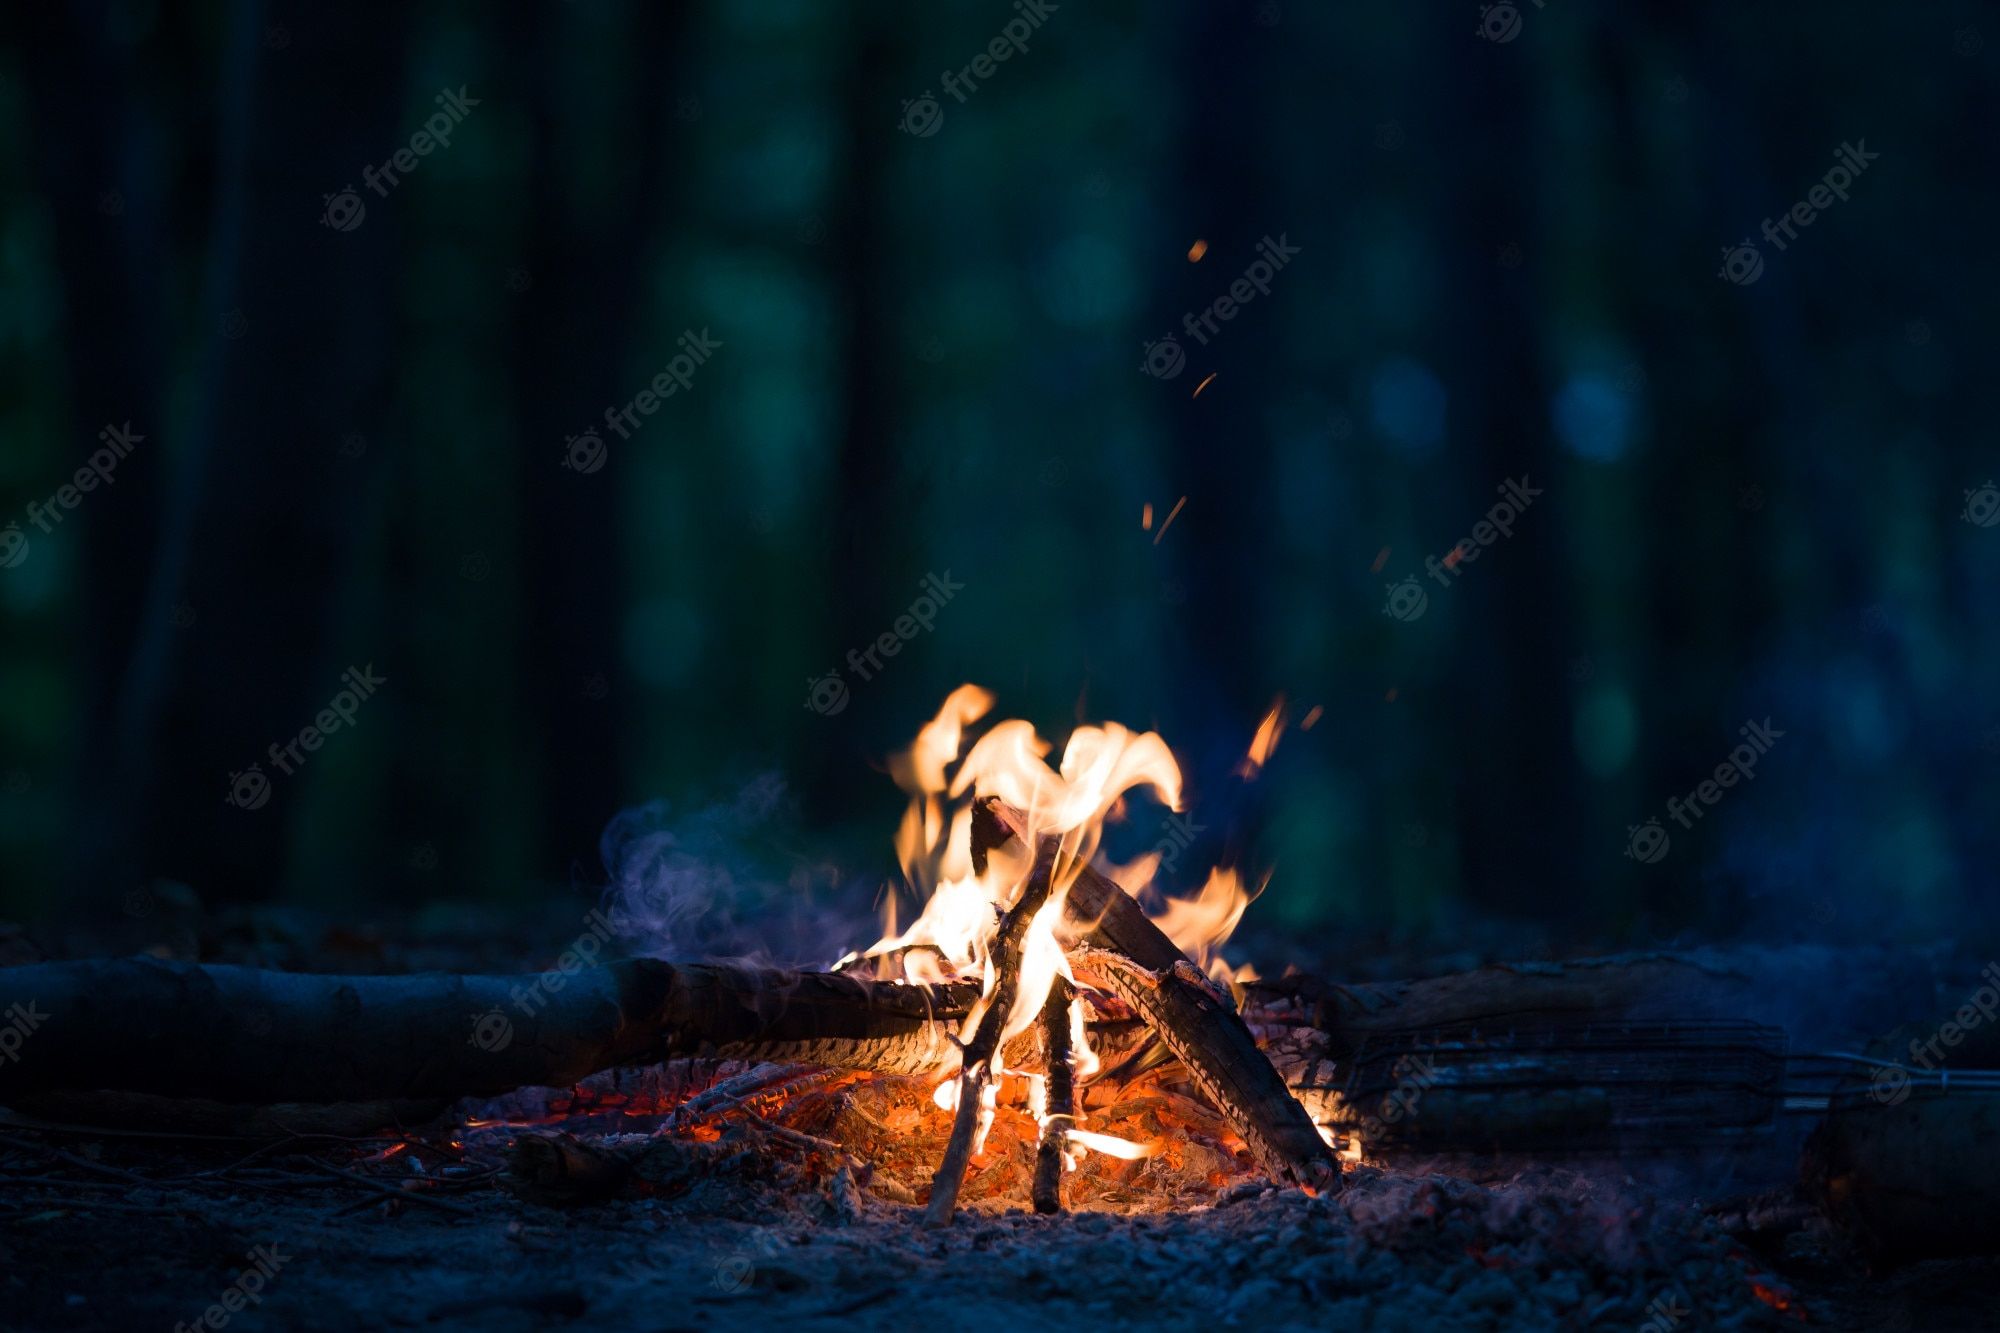 A fire pit in the woods at night - Camping